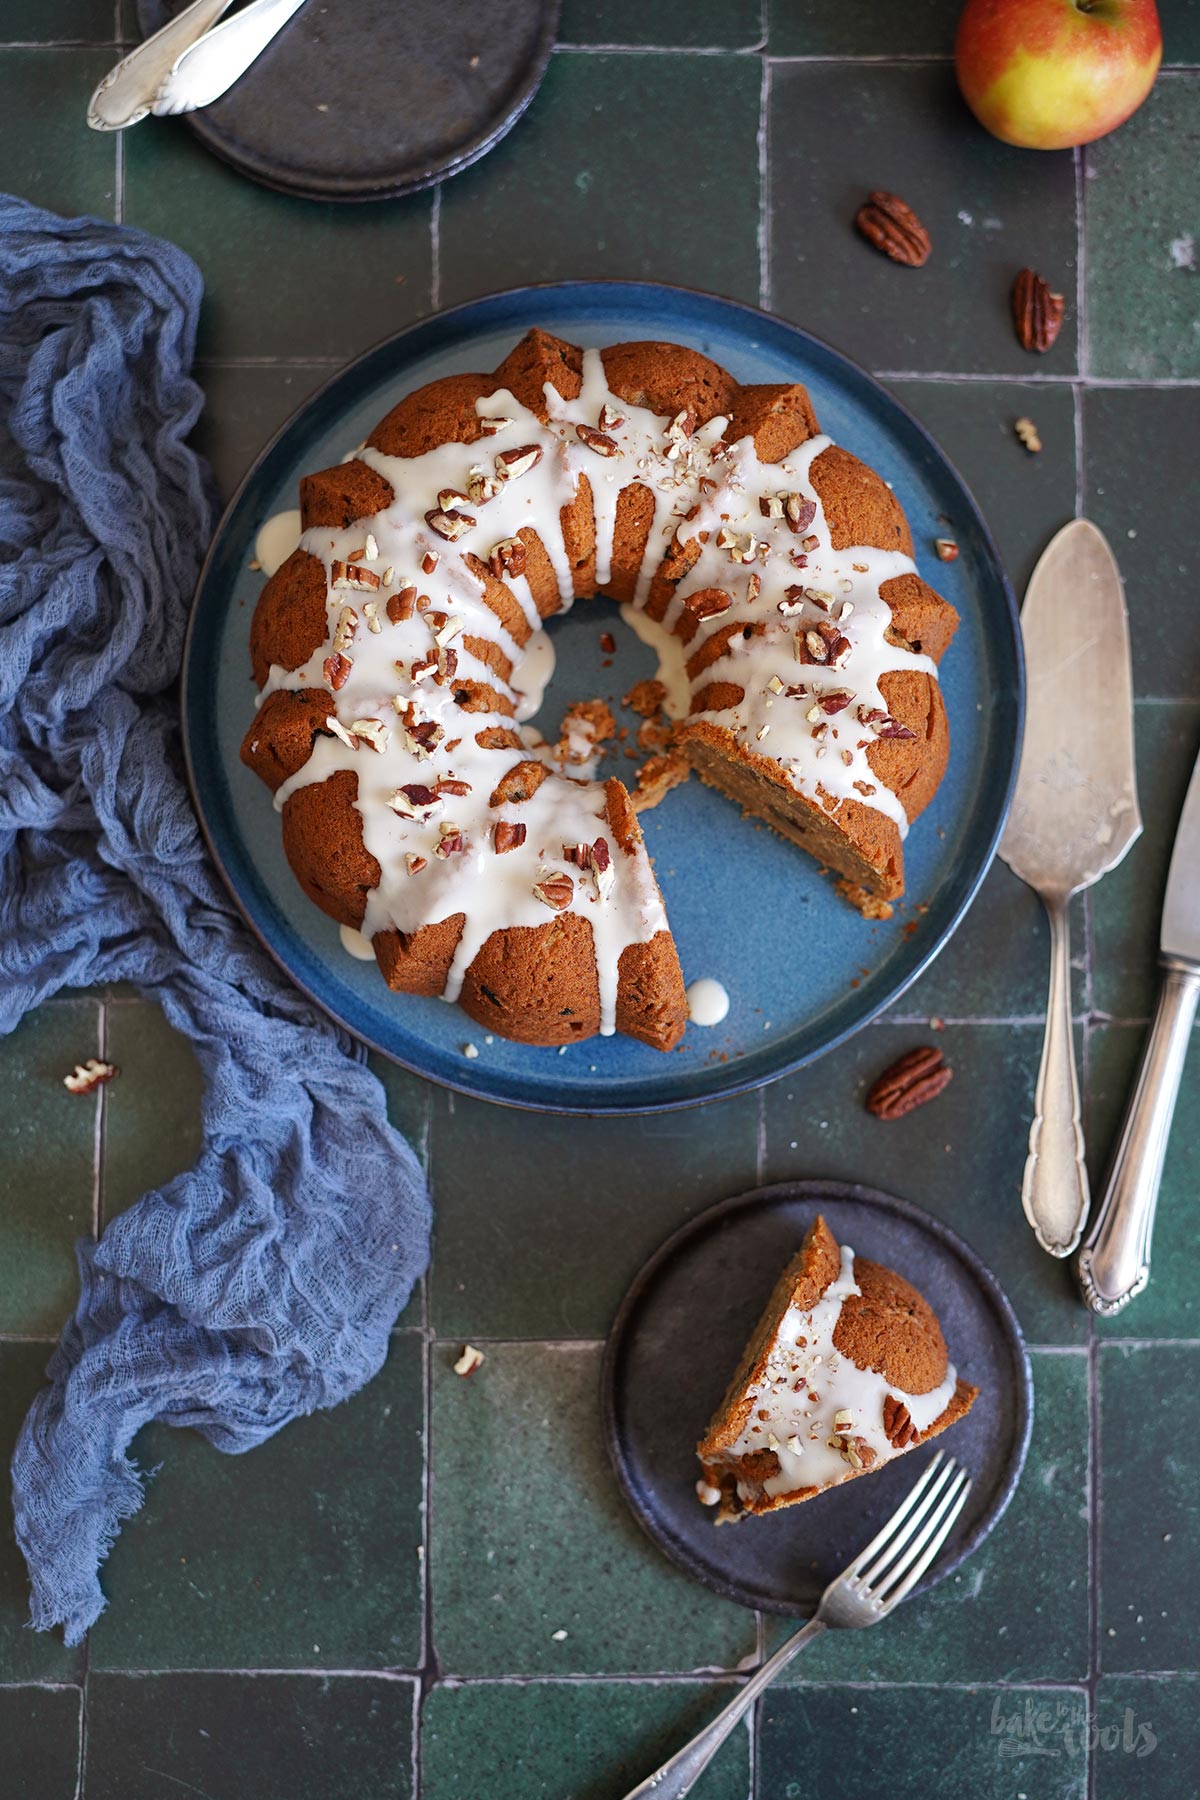 Spiced Apple Bundt Cake | Bake to the roots